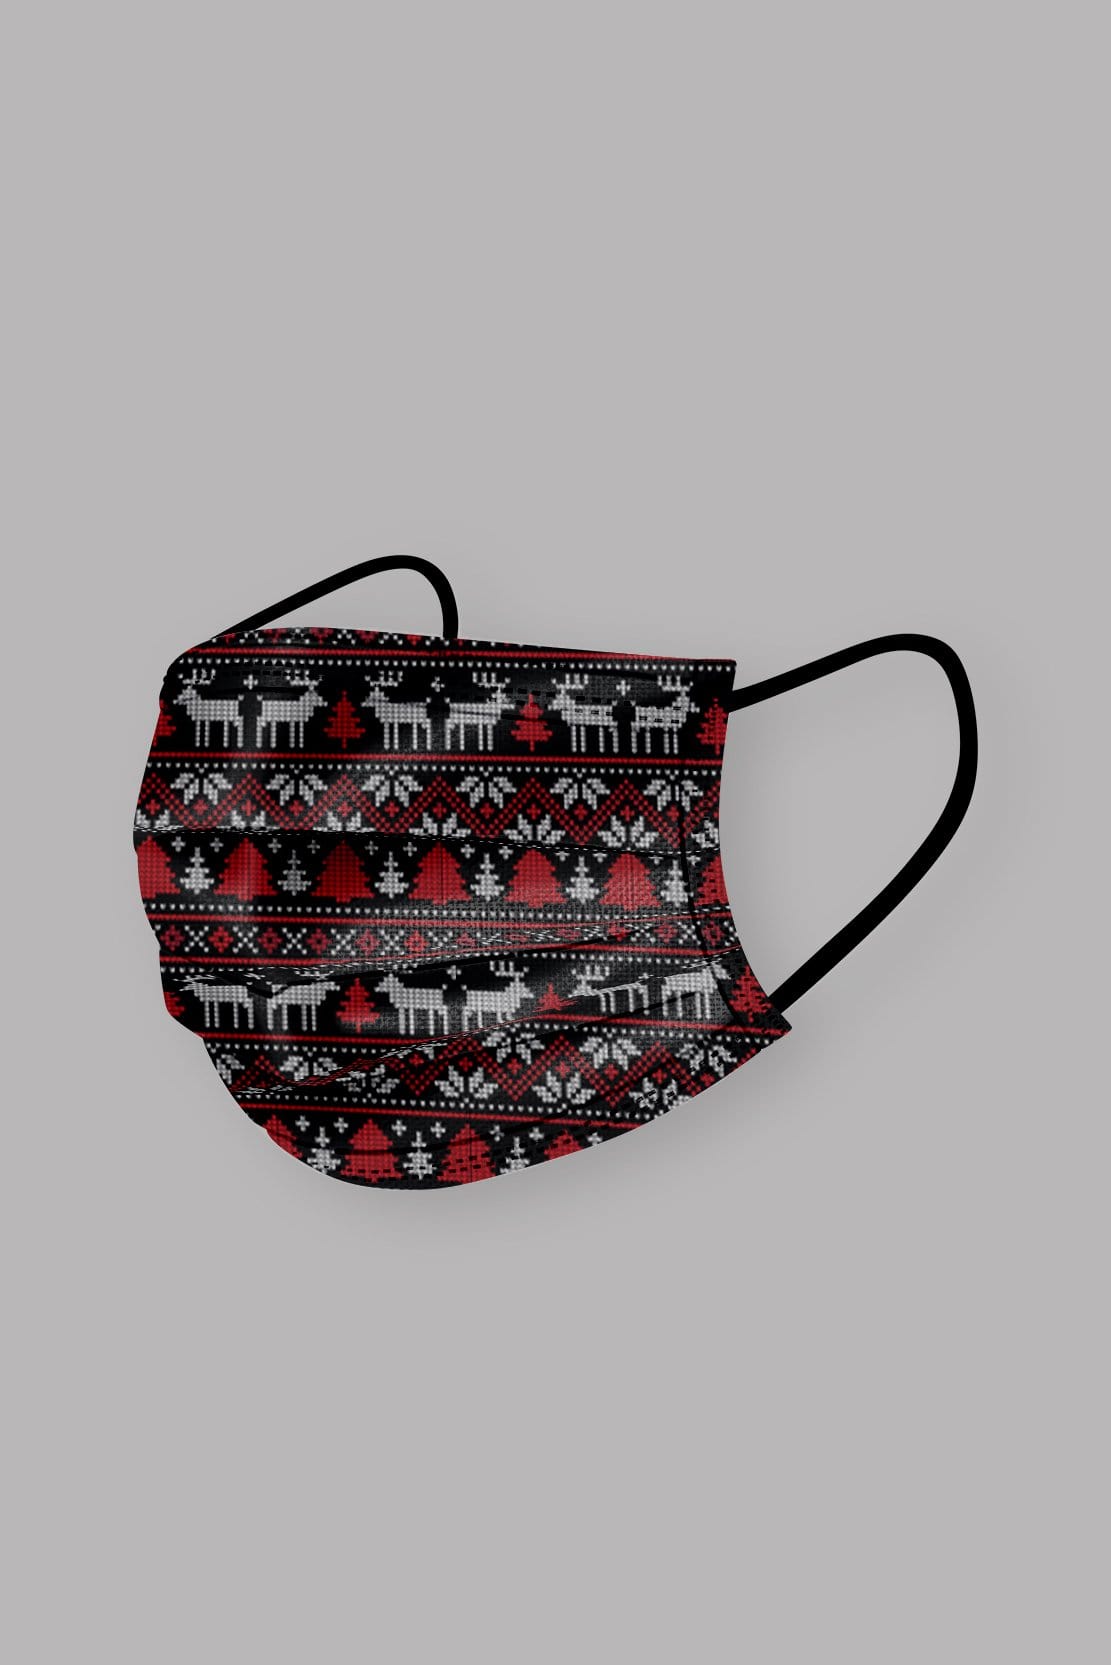 Stylish Holiday Themed Pleated face mask, with soft black ear loops and high quality fabric. 